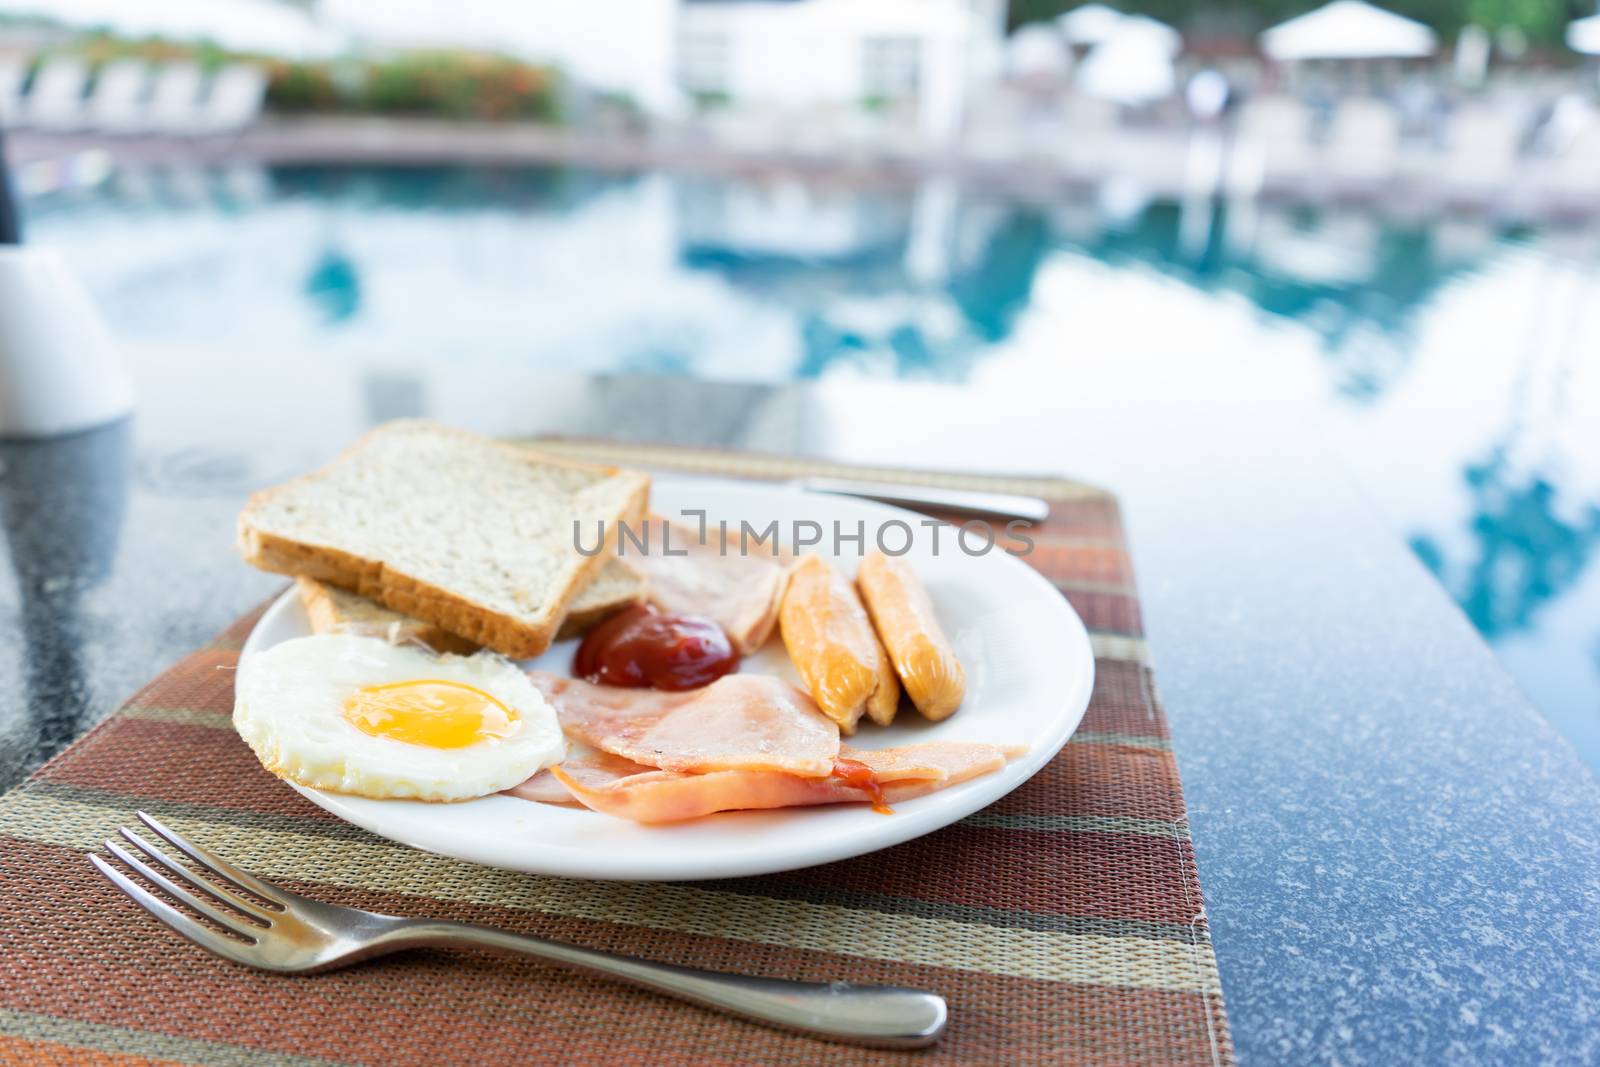 Delicious Breakfast set by the swimming pool at Pattaya, Thailan by littlekop